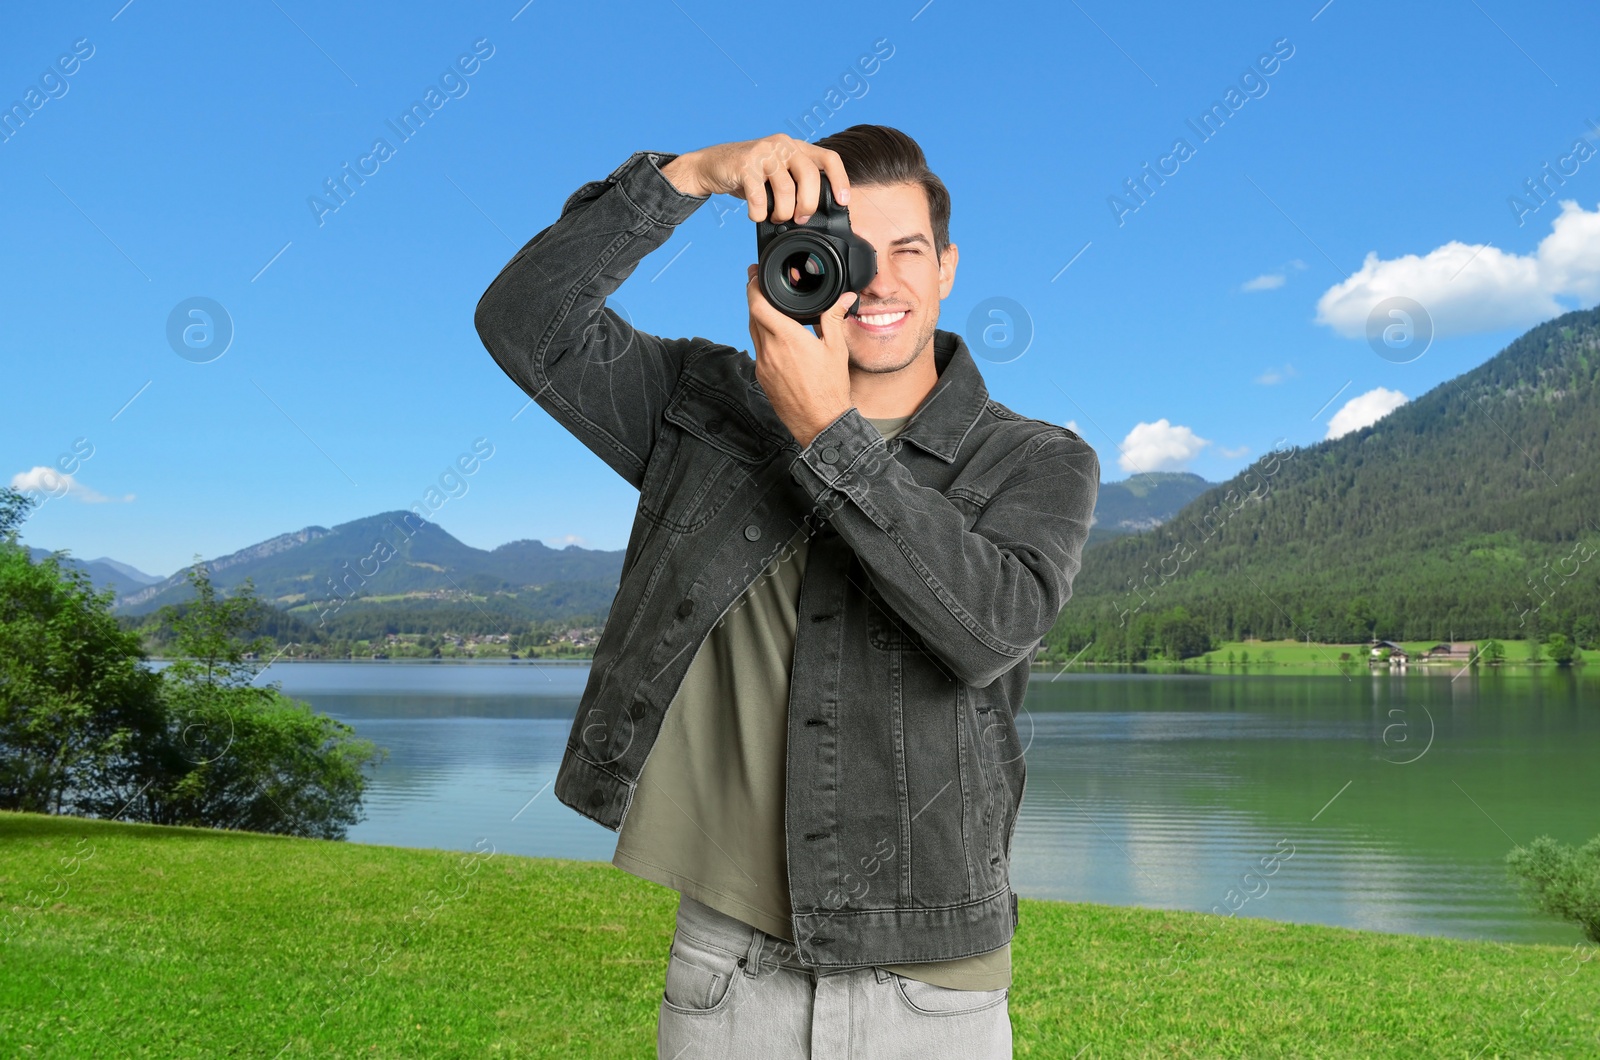 Image of Photographer holding professional camera and beautiful landscape with mountains and river on background